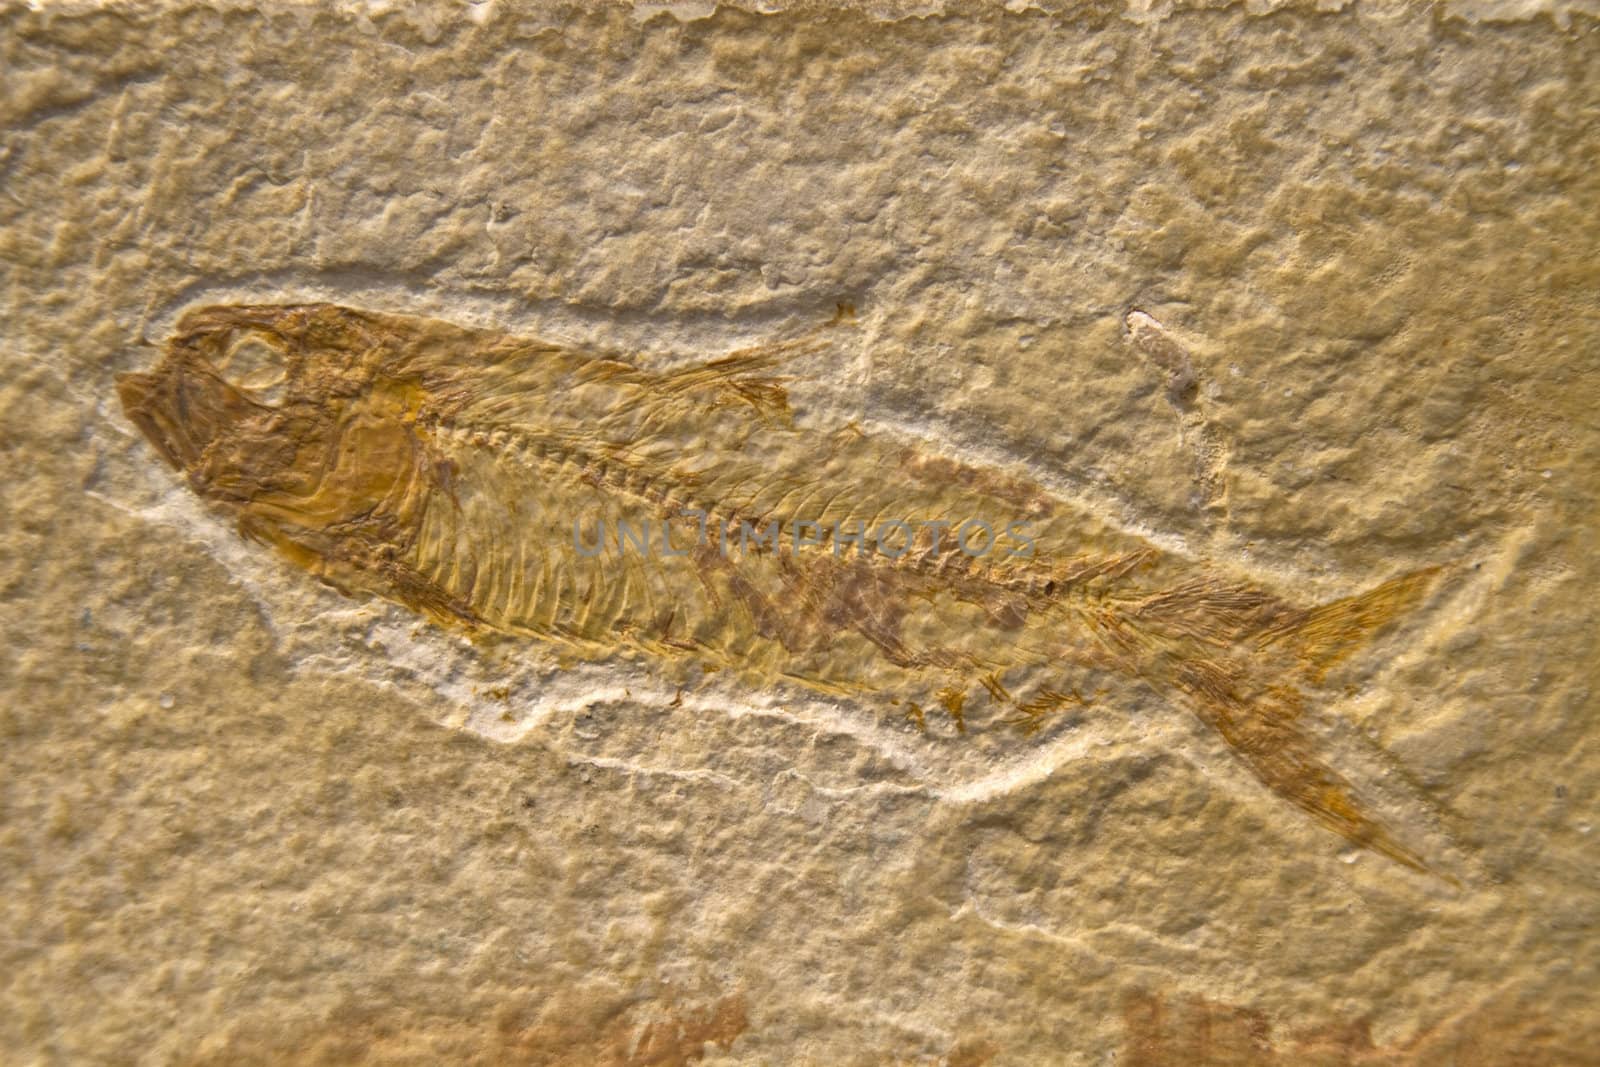 Fossilized Fish by Davidgn